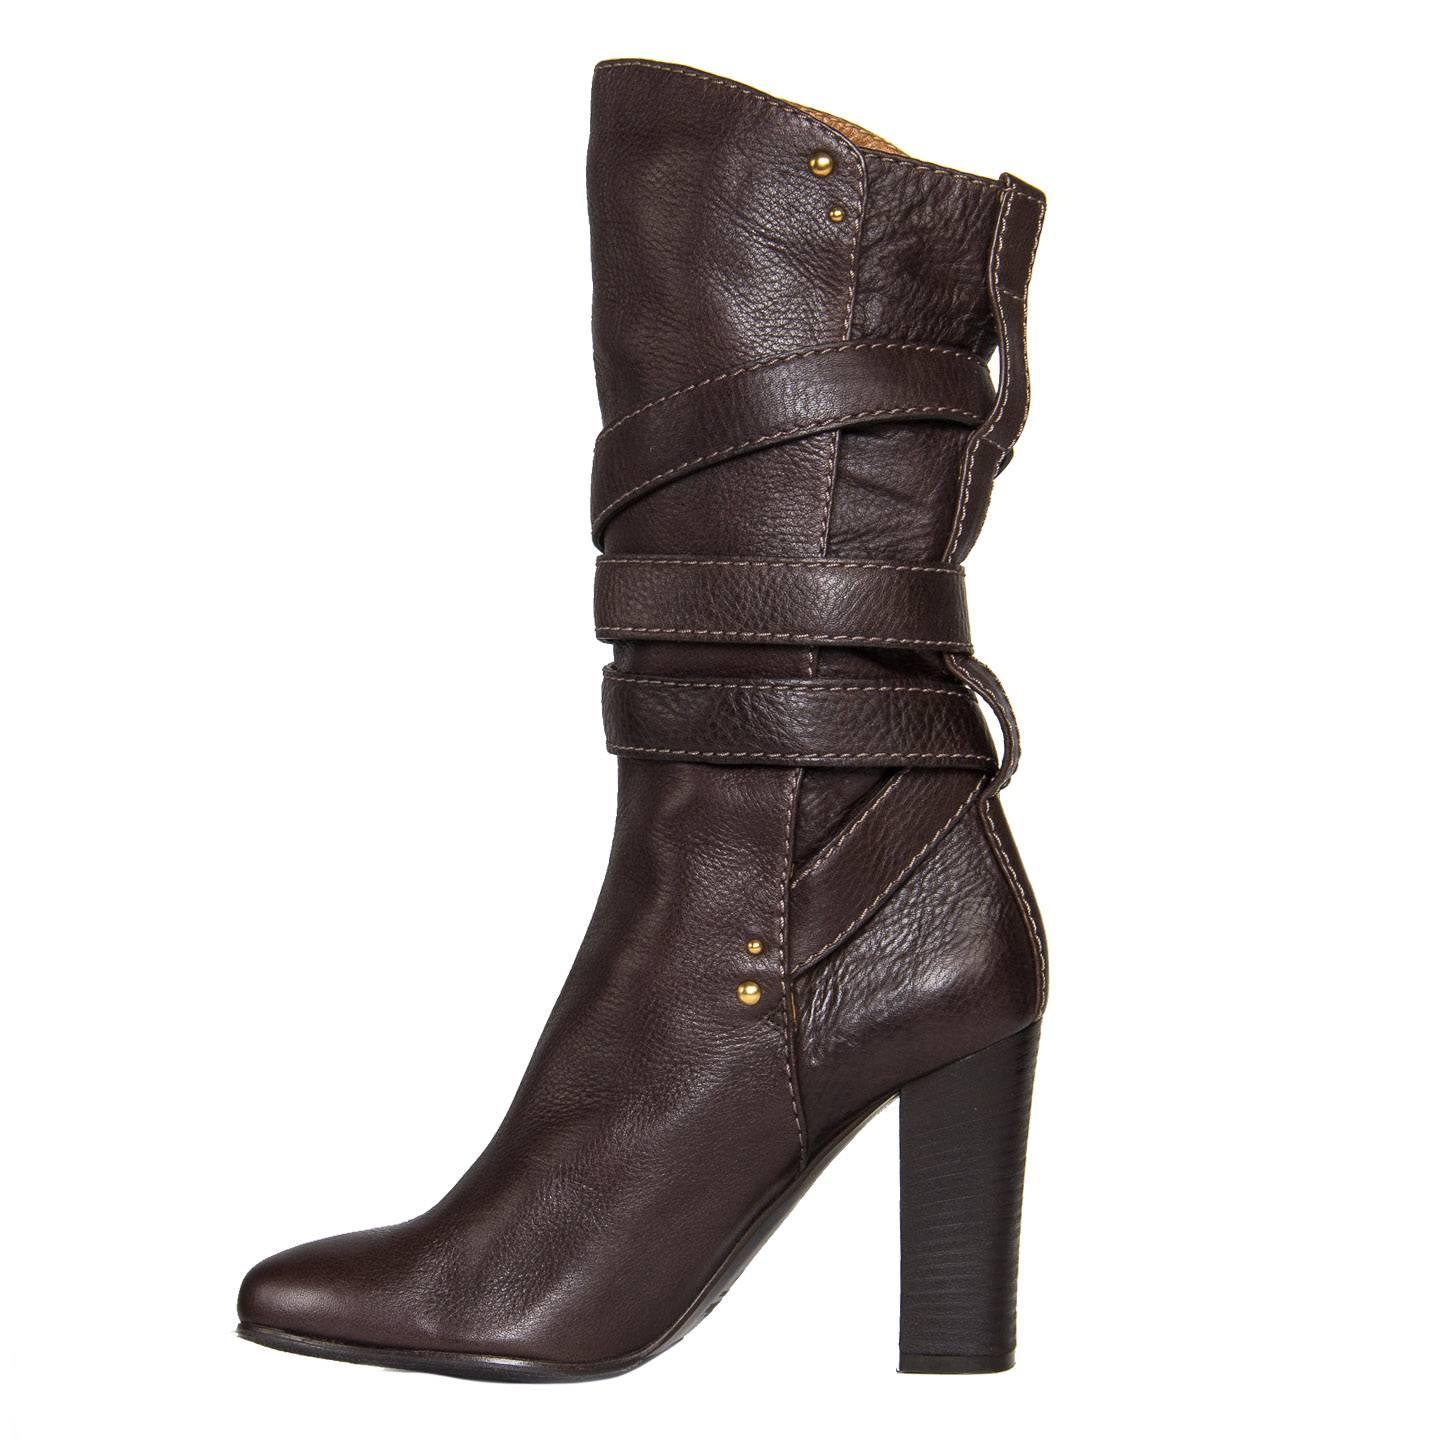 Chloe' Chocolate Brown Boots In New Condition For Sale In Brooklyn, NY